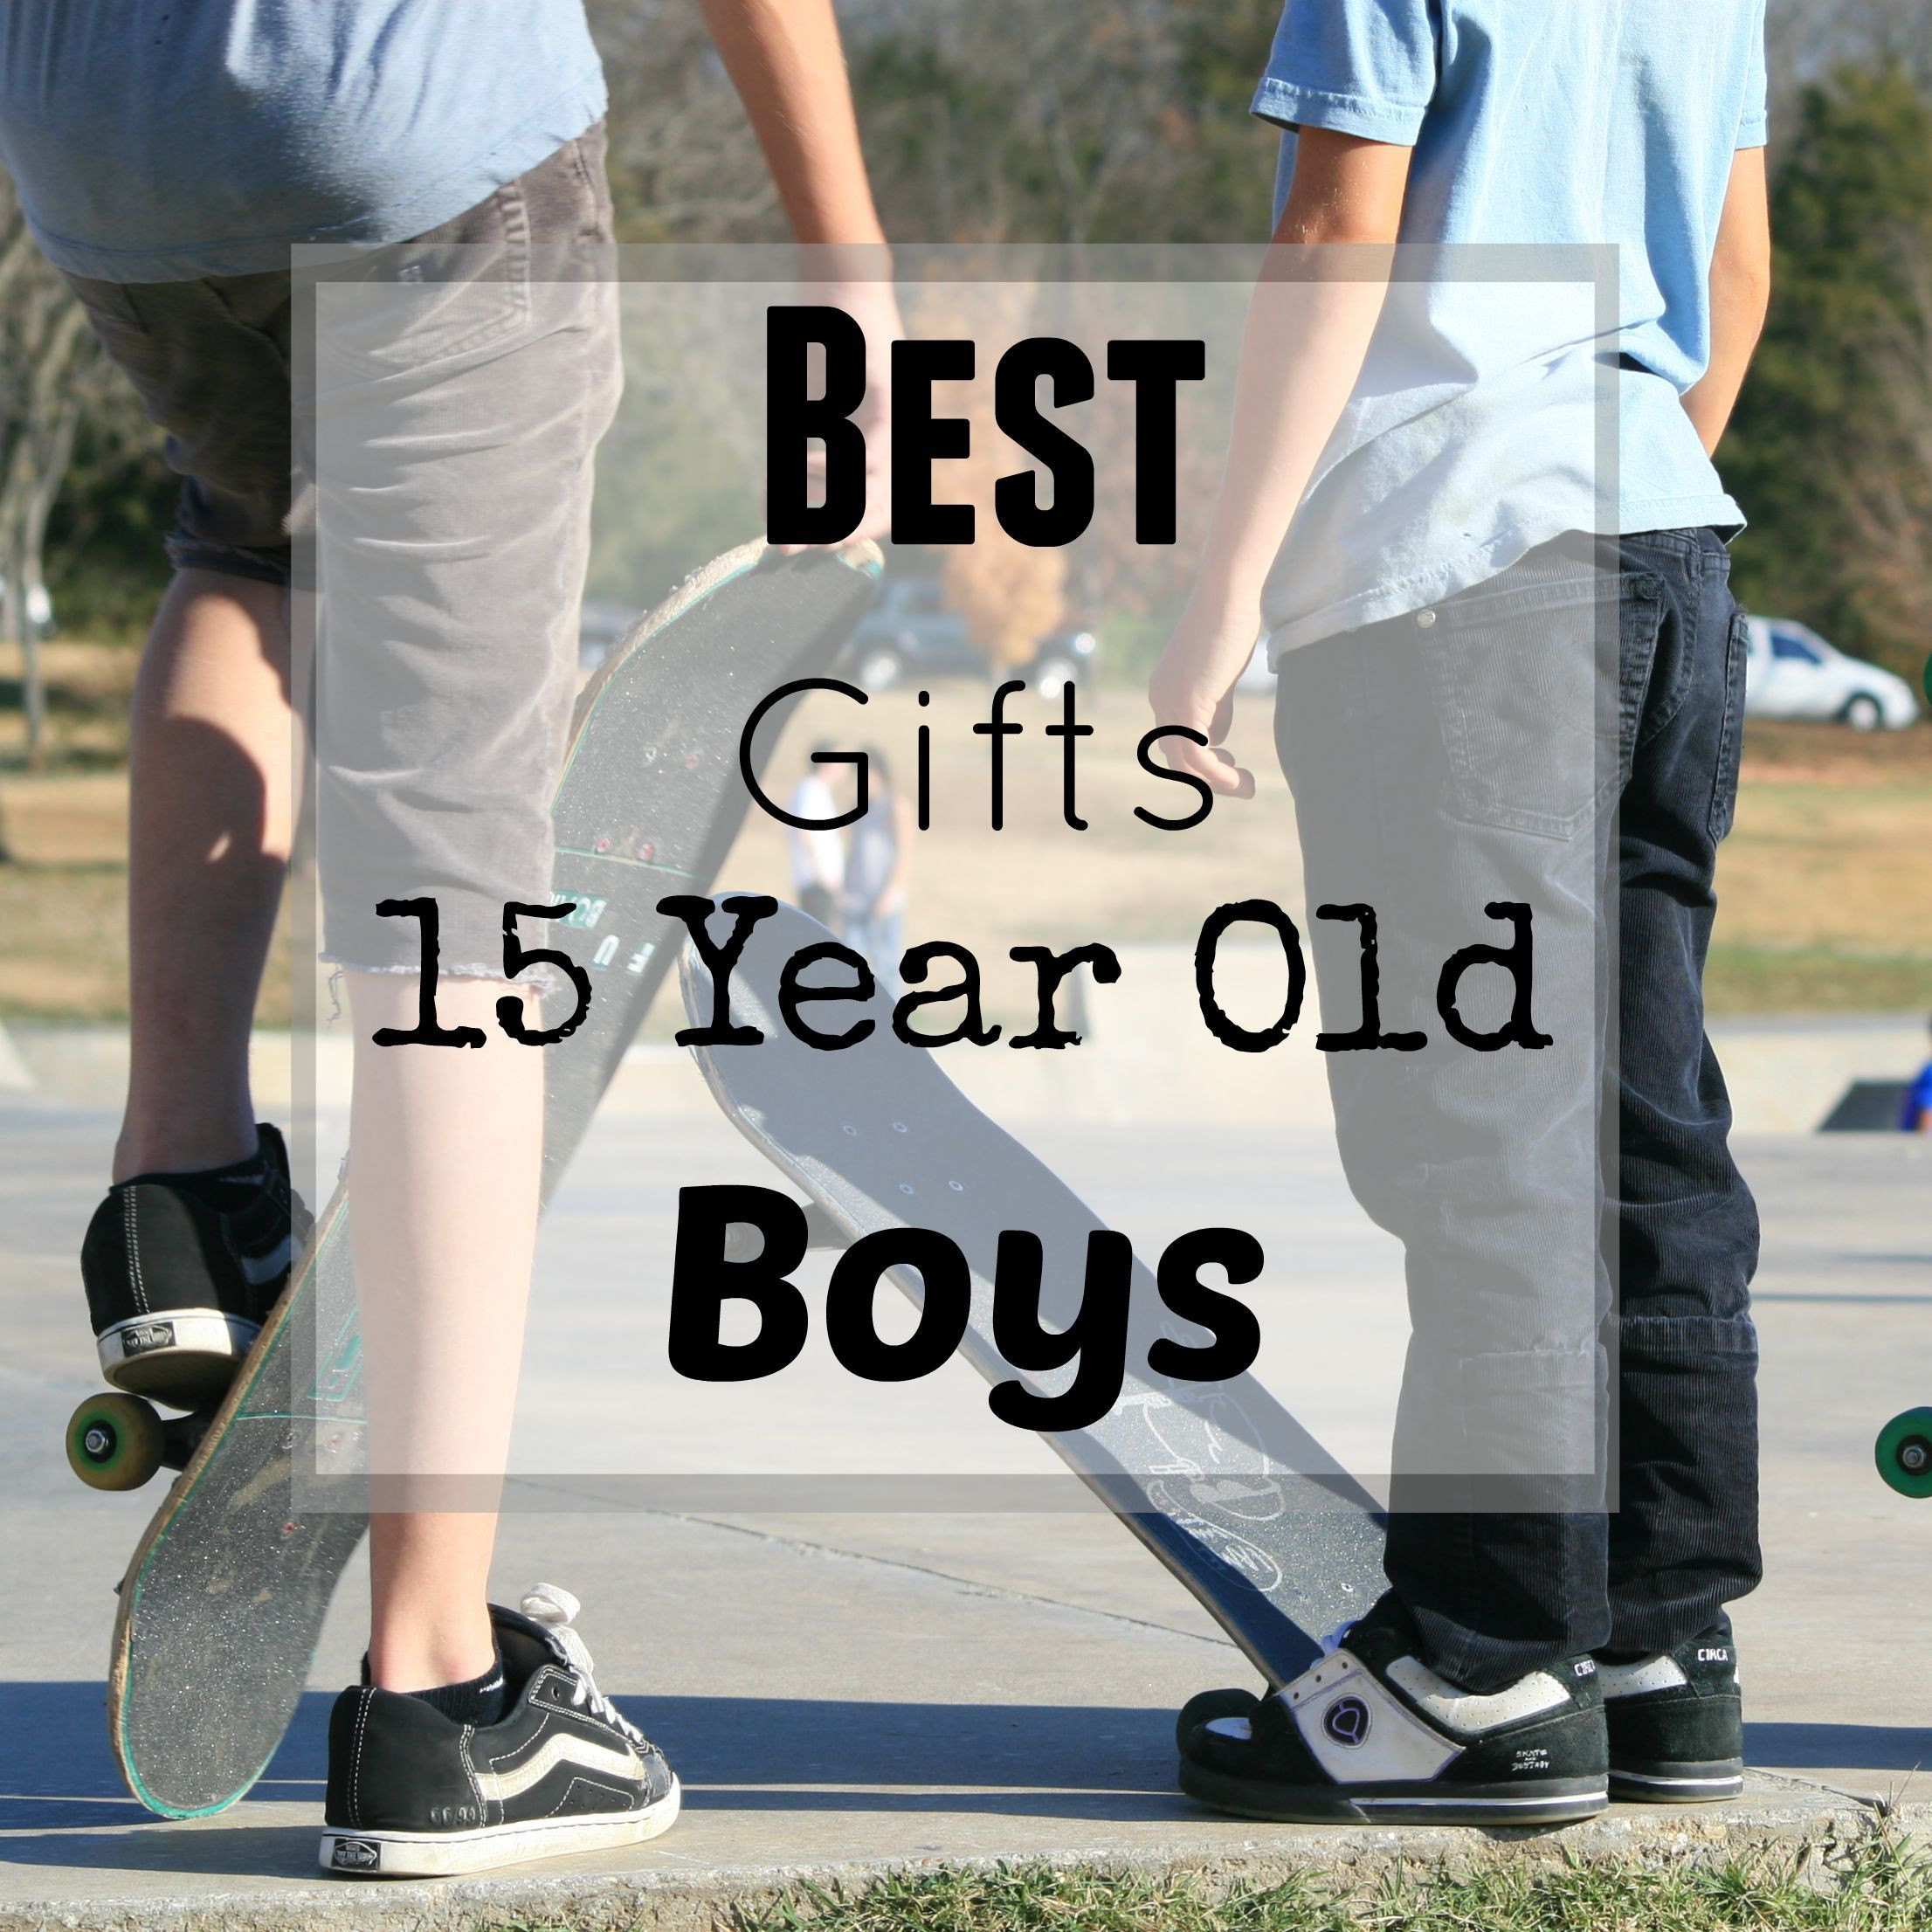 Birthday Gift Ideas For 15 Year Old Boy
 Best Gifts for 15 Year Old Boys